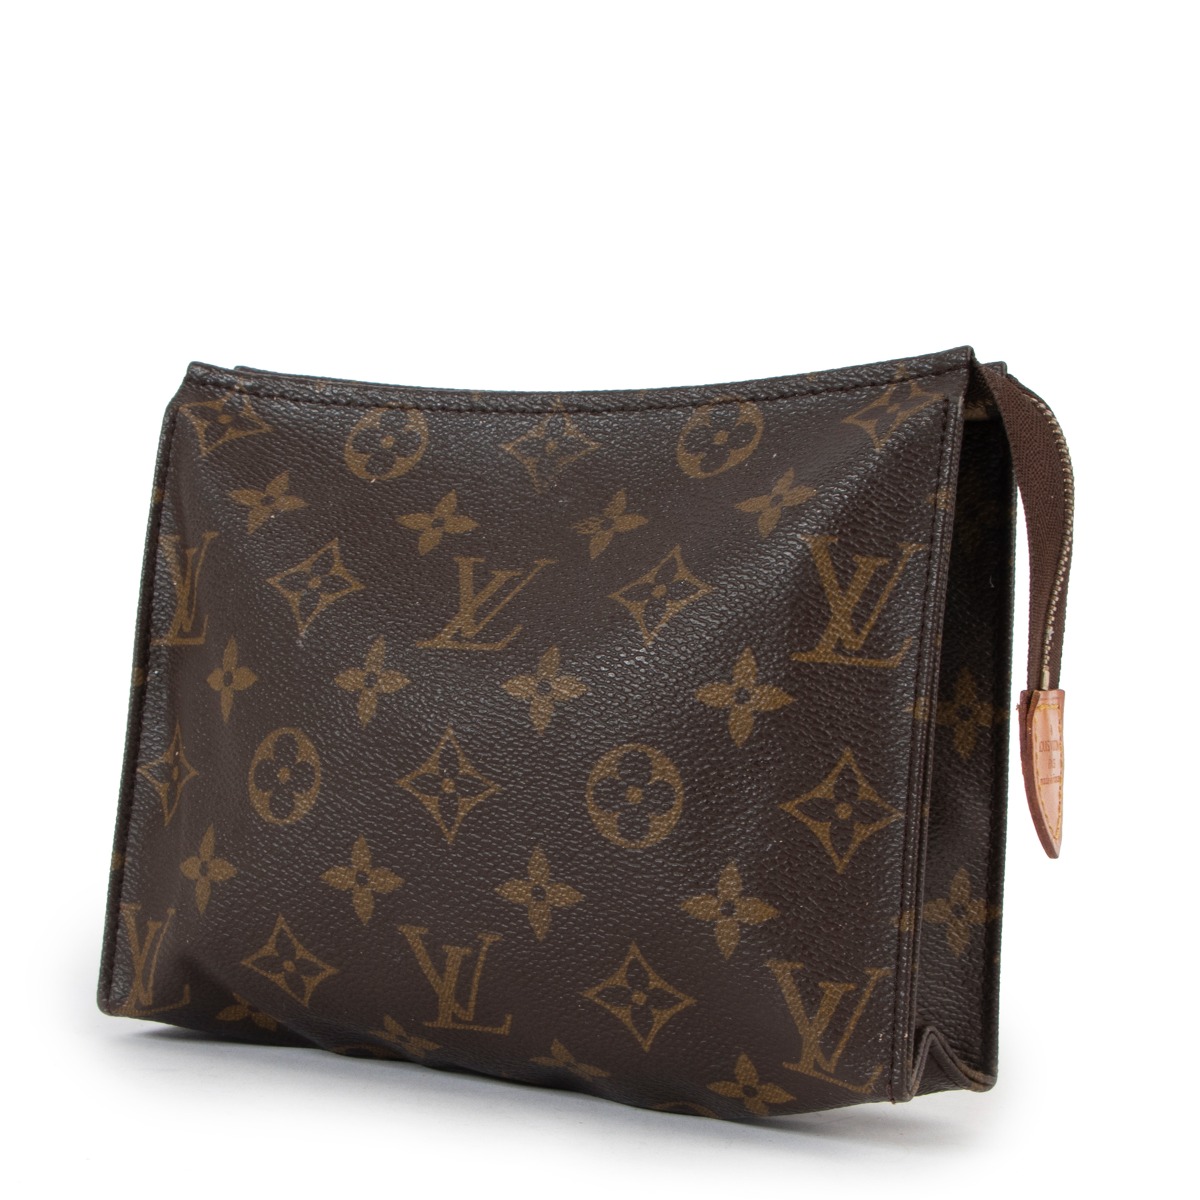 How to make Louis Vuitton Toiletry 19 a Crossbody